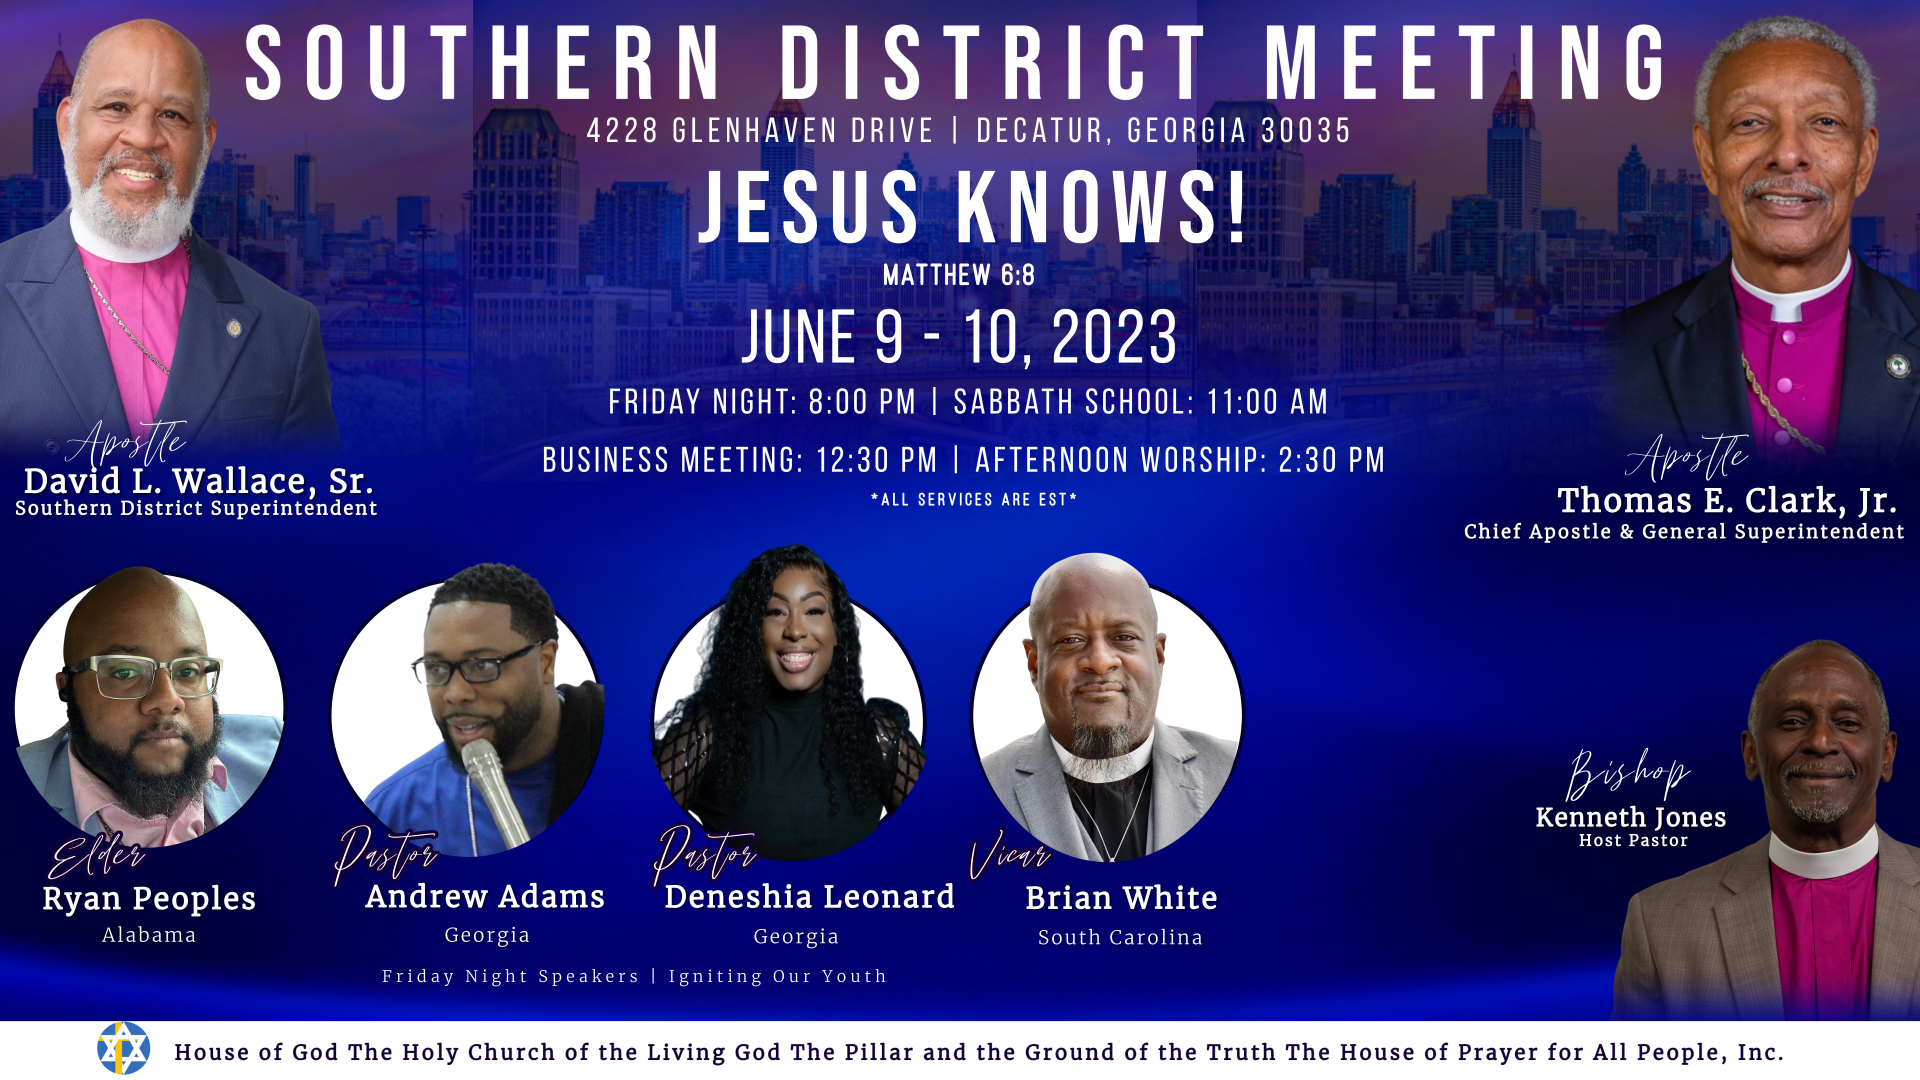 2023 Southern District Meeting